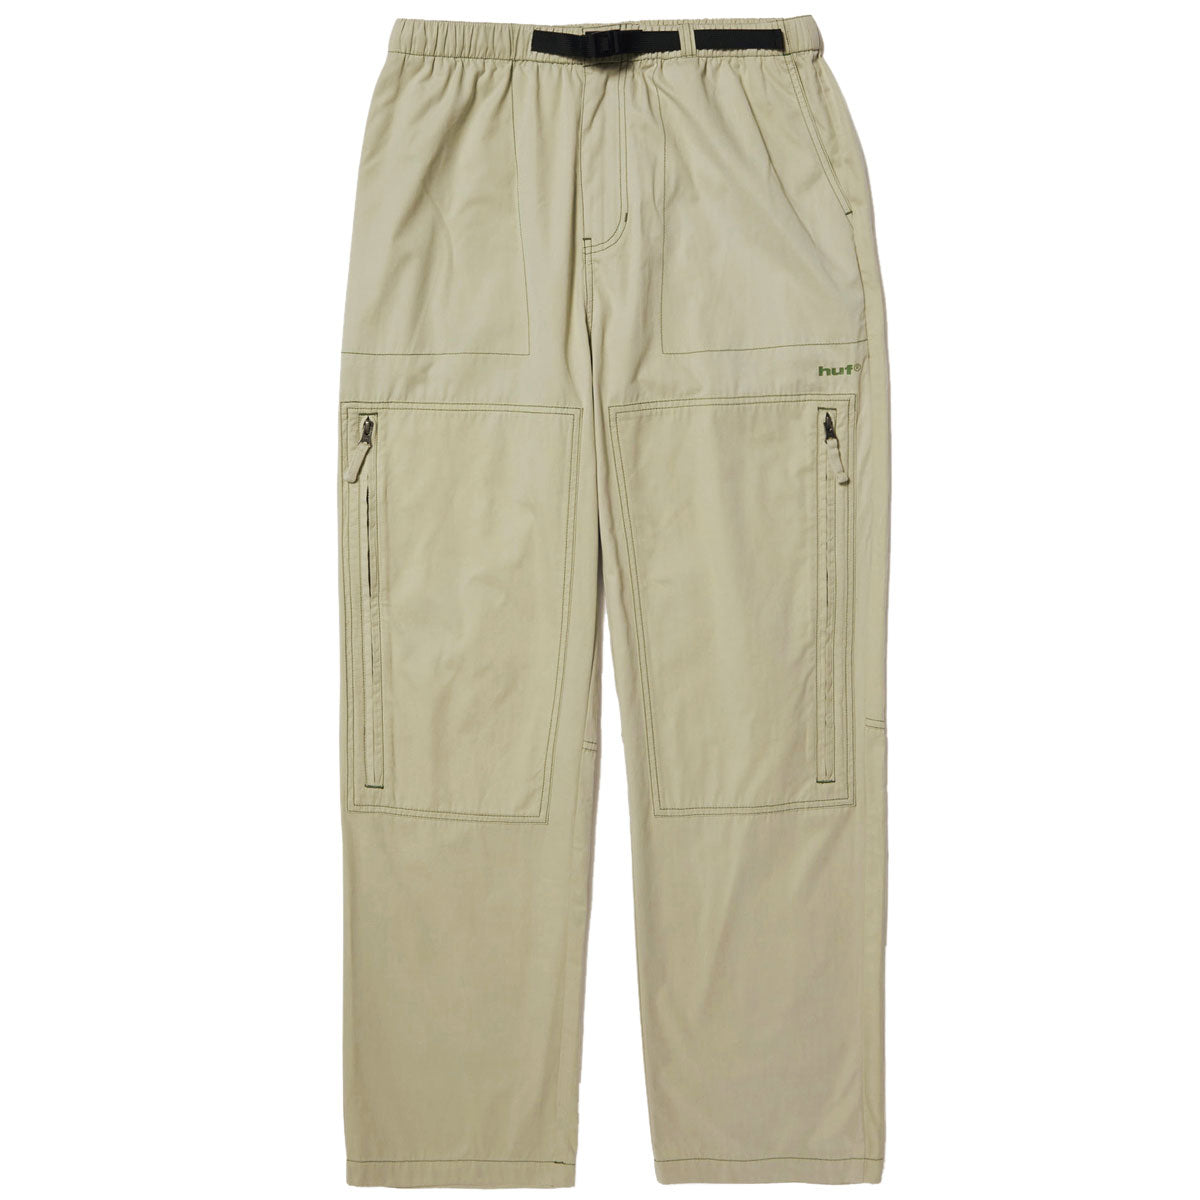 Huf Loma Tech Pant in Biscuit - Size XL